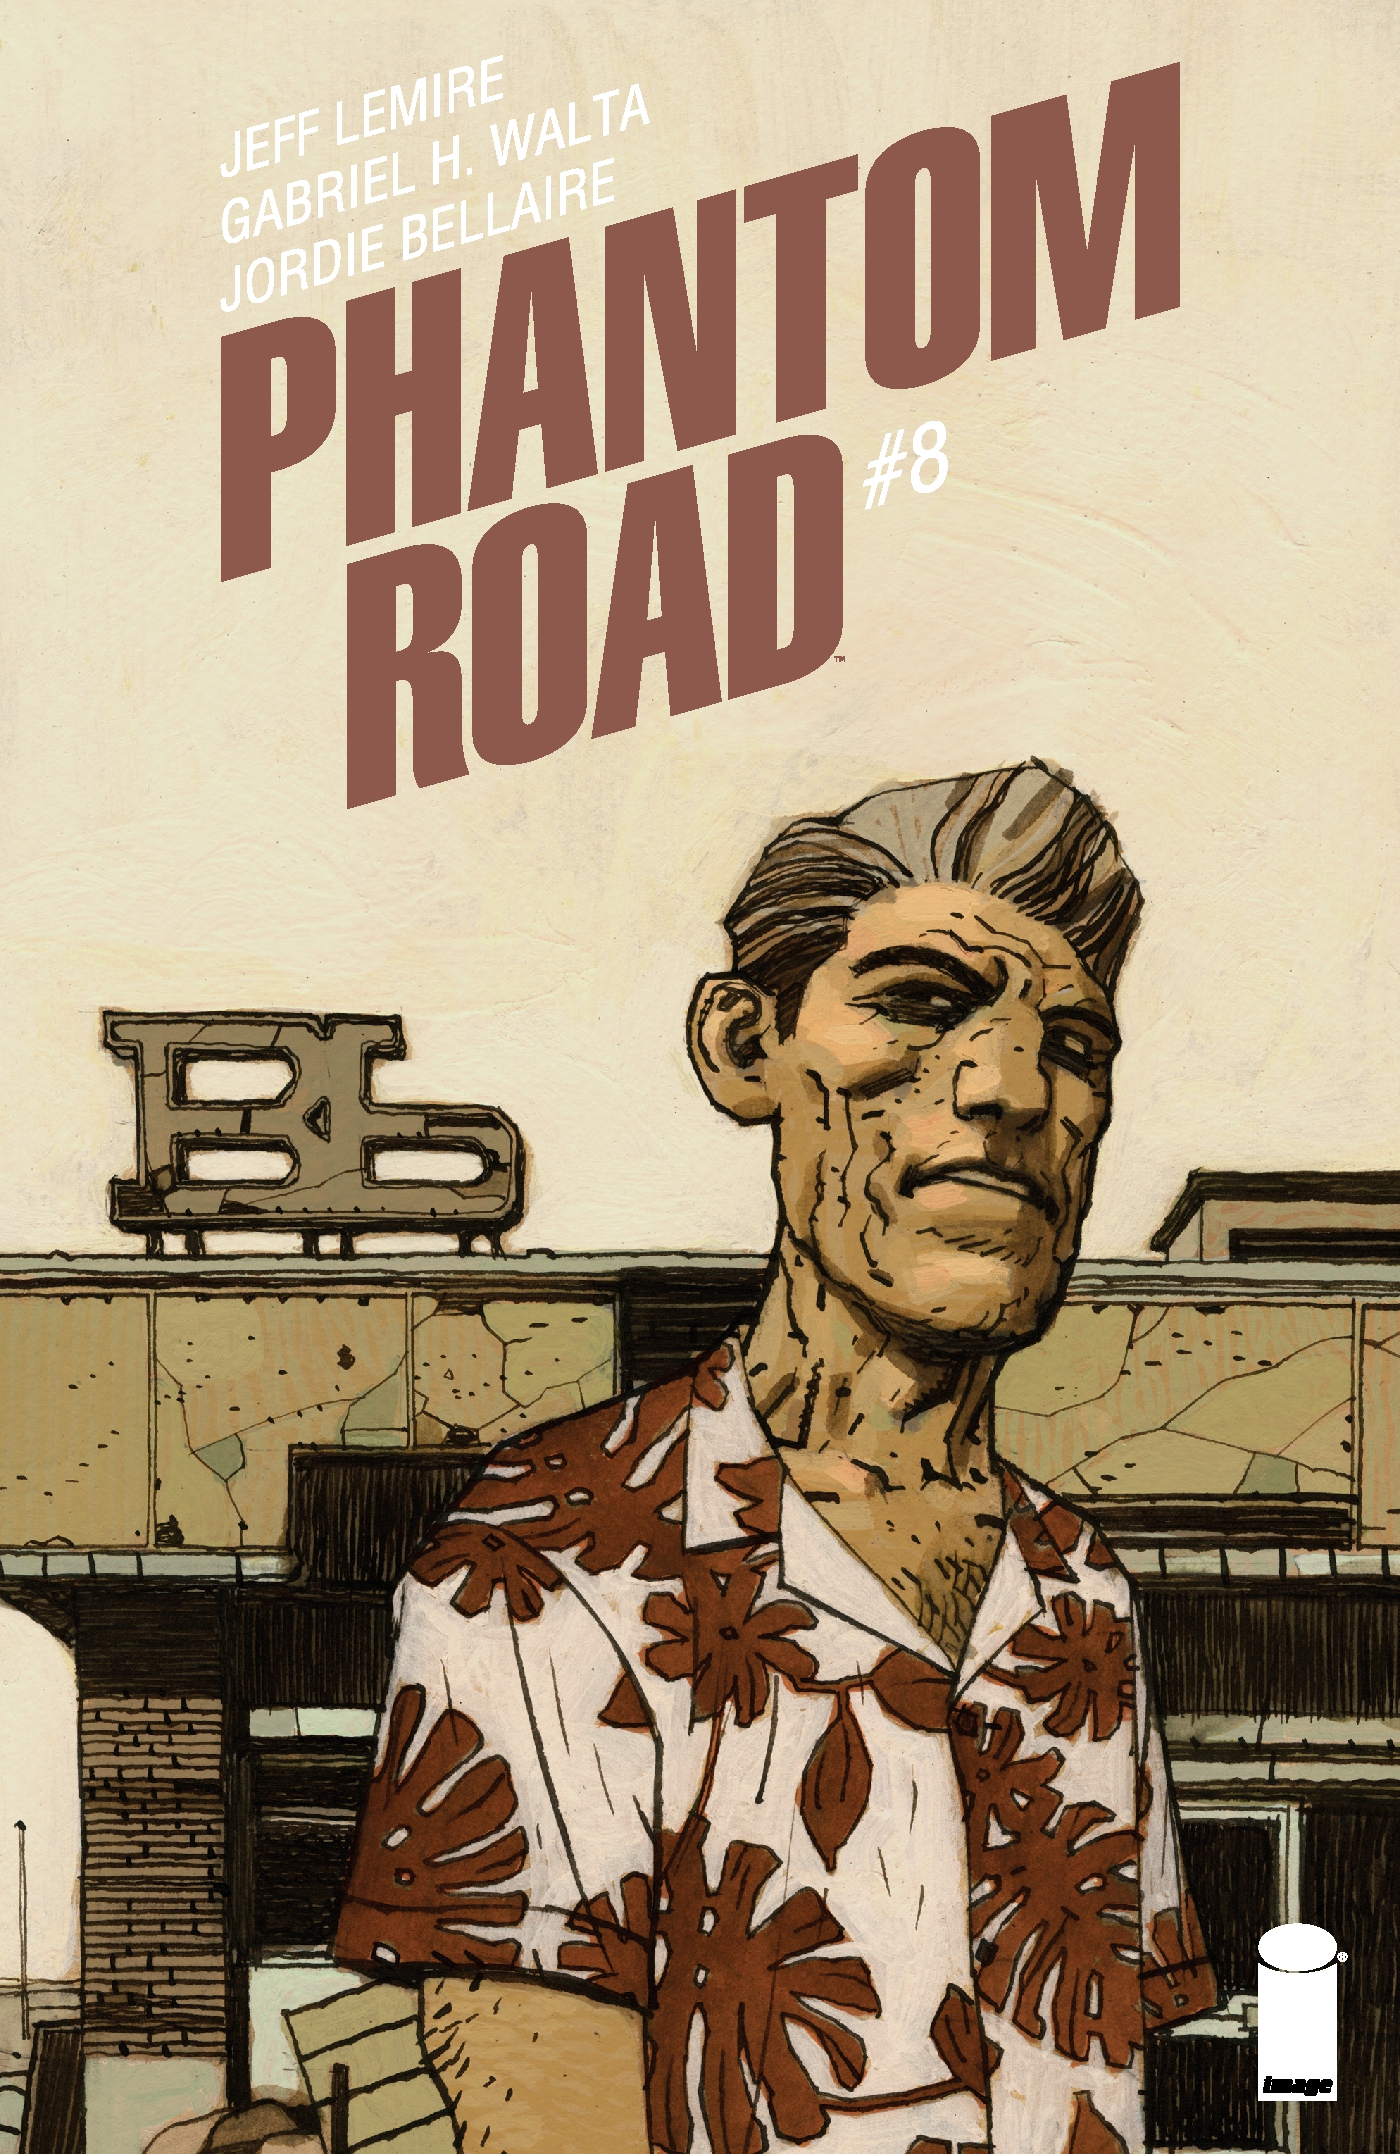 This image is the cover for the book Phantom Road #8, Phantom Road